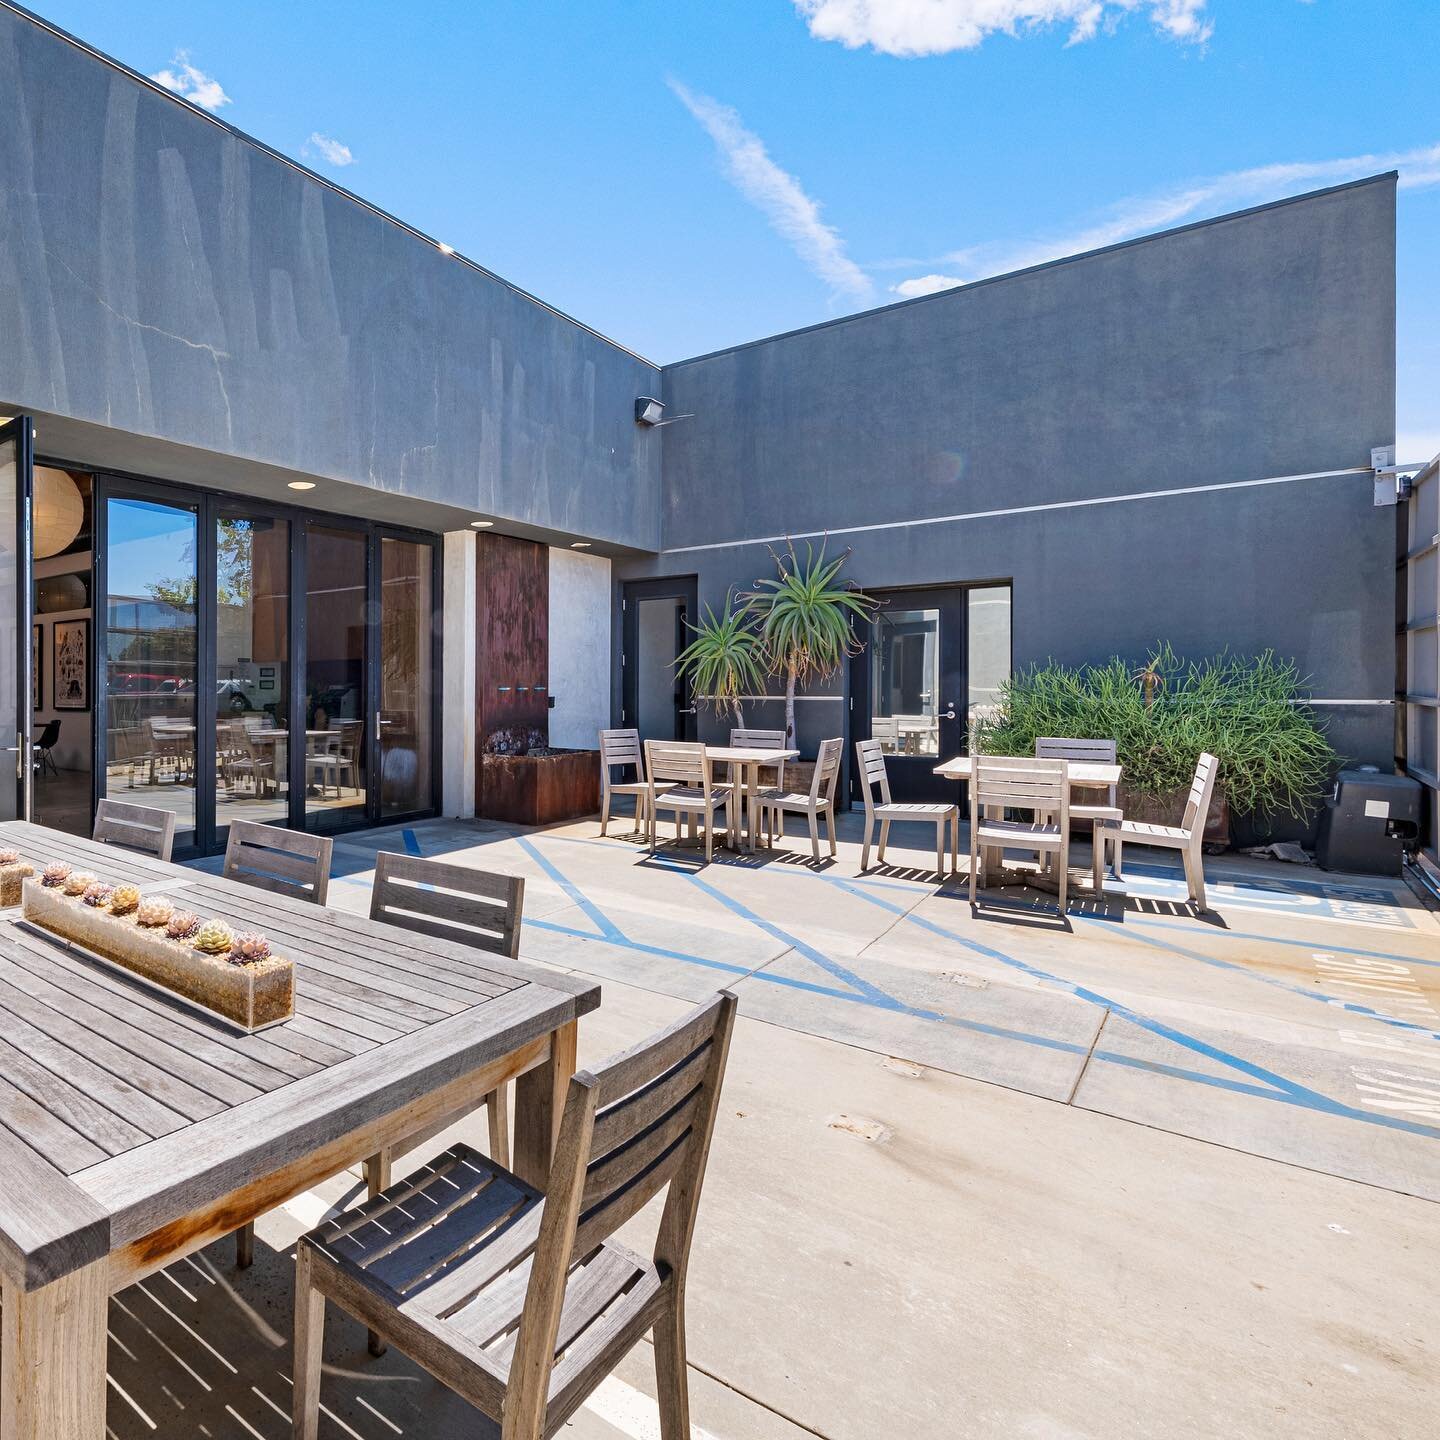 FOR LEASE:📍1707 12th St
Free-Standing Compound in Santa Monica Media District

* Rare availability: entire building for lease in Santa Monica Media District
* Extensive renovations throughout&nbsp;the property
* Features high&nbsp;exposed ceilings, 